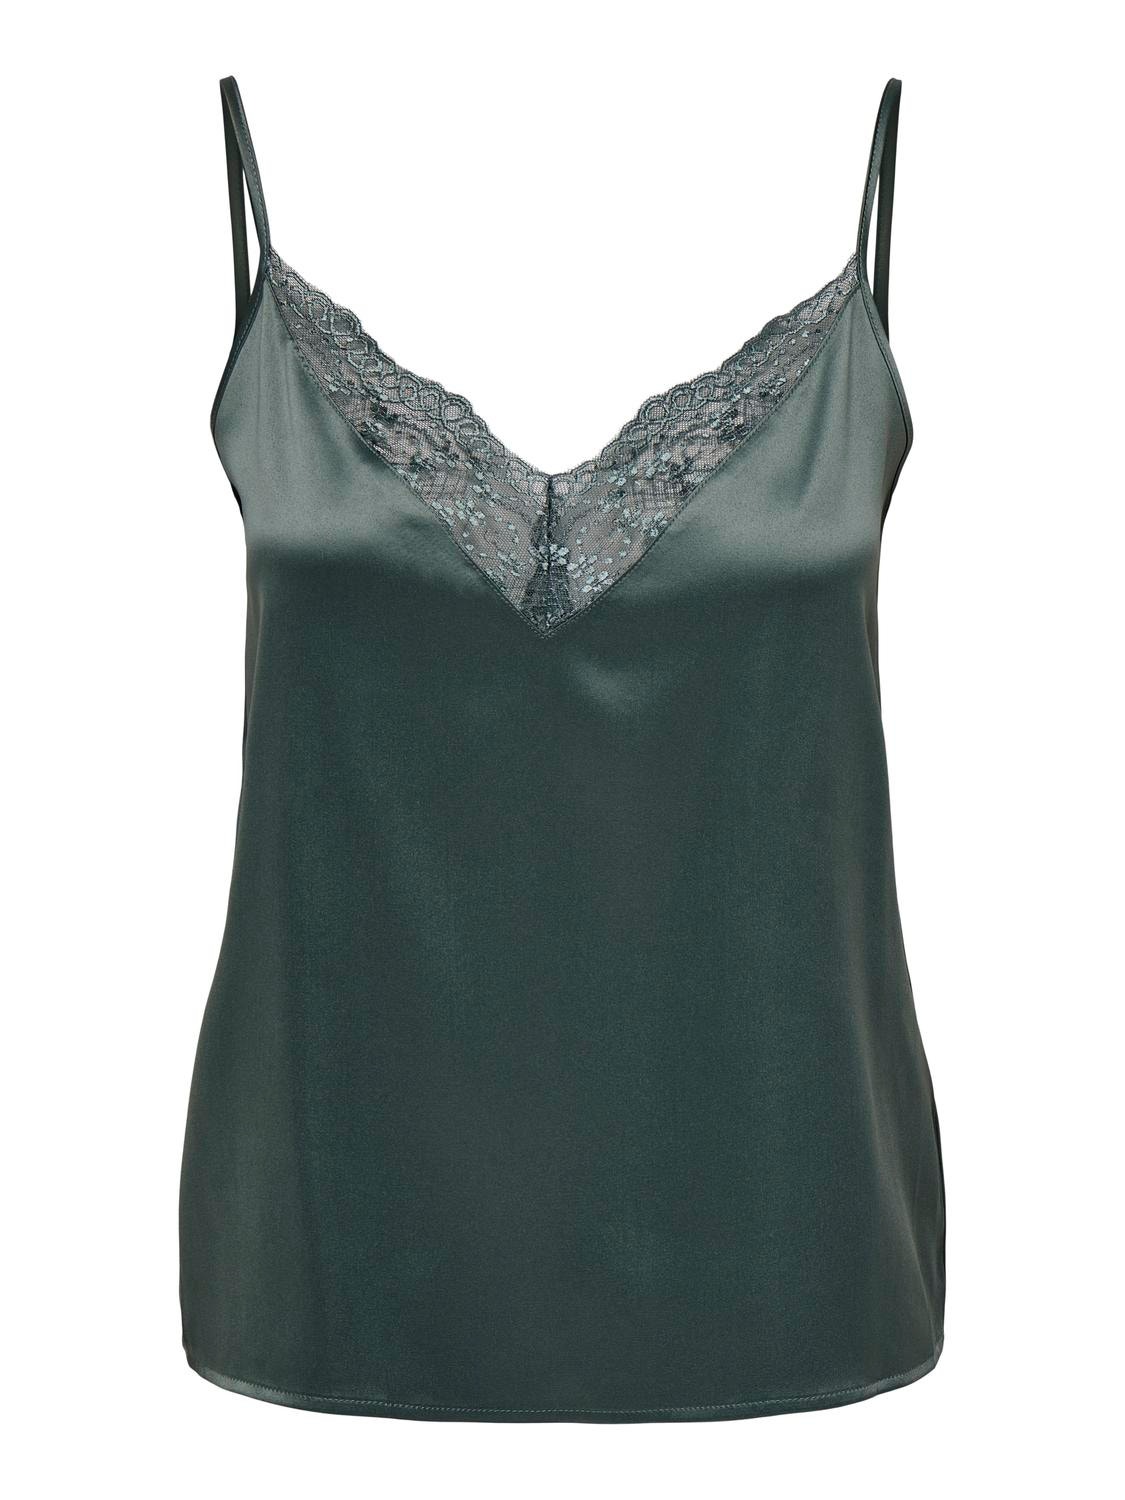 ONLY Singlet Top With Lace Details -Balsam Green - 15287104